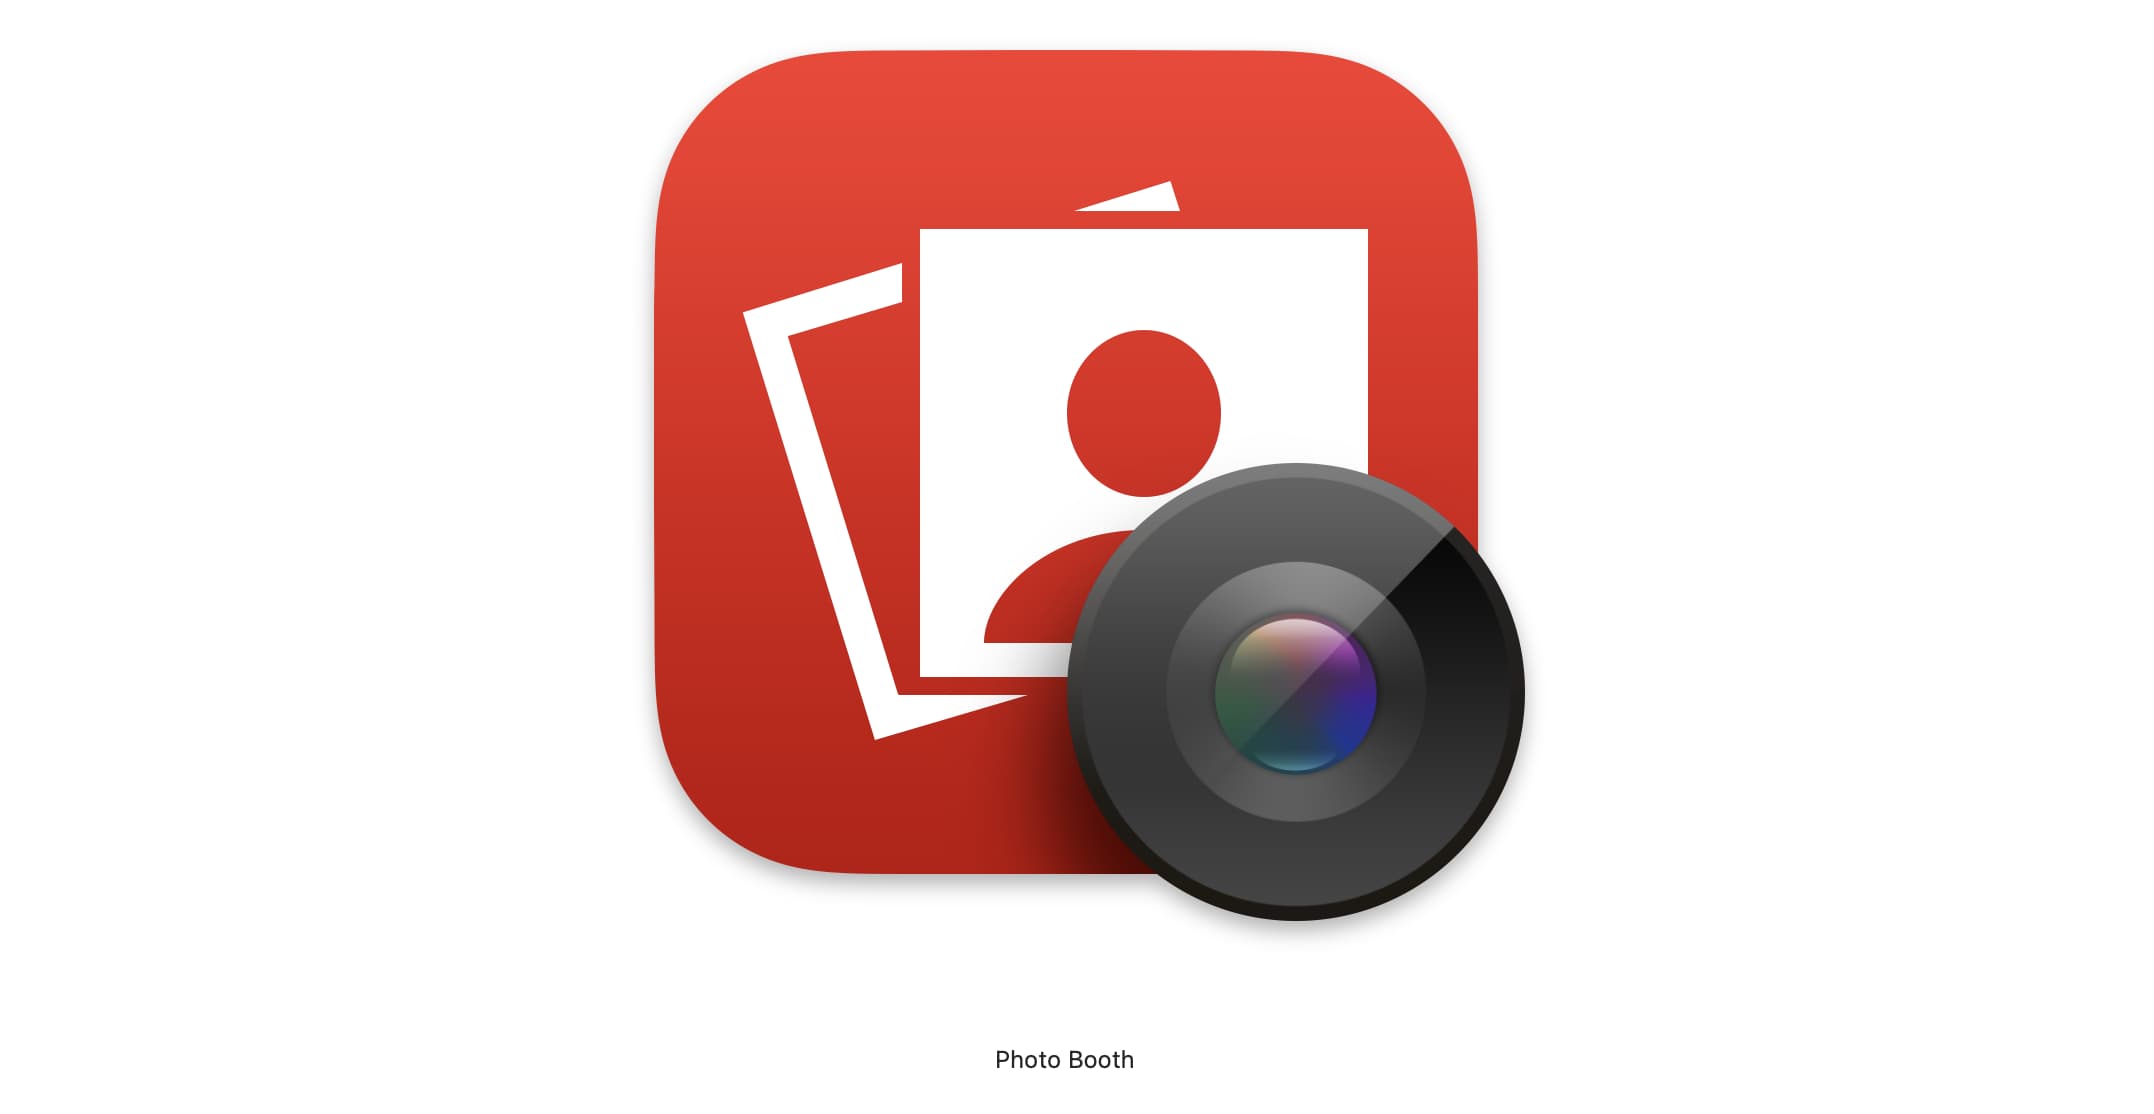 Photo Booth app icon on Mac